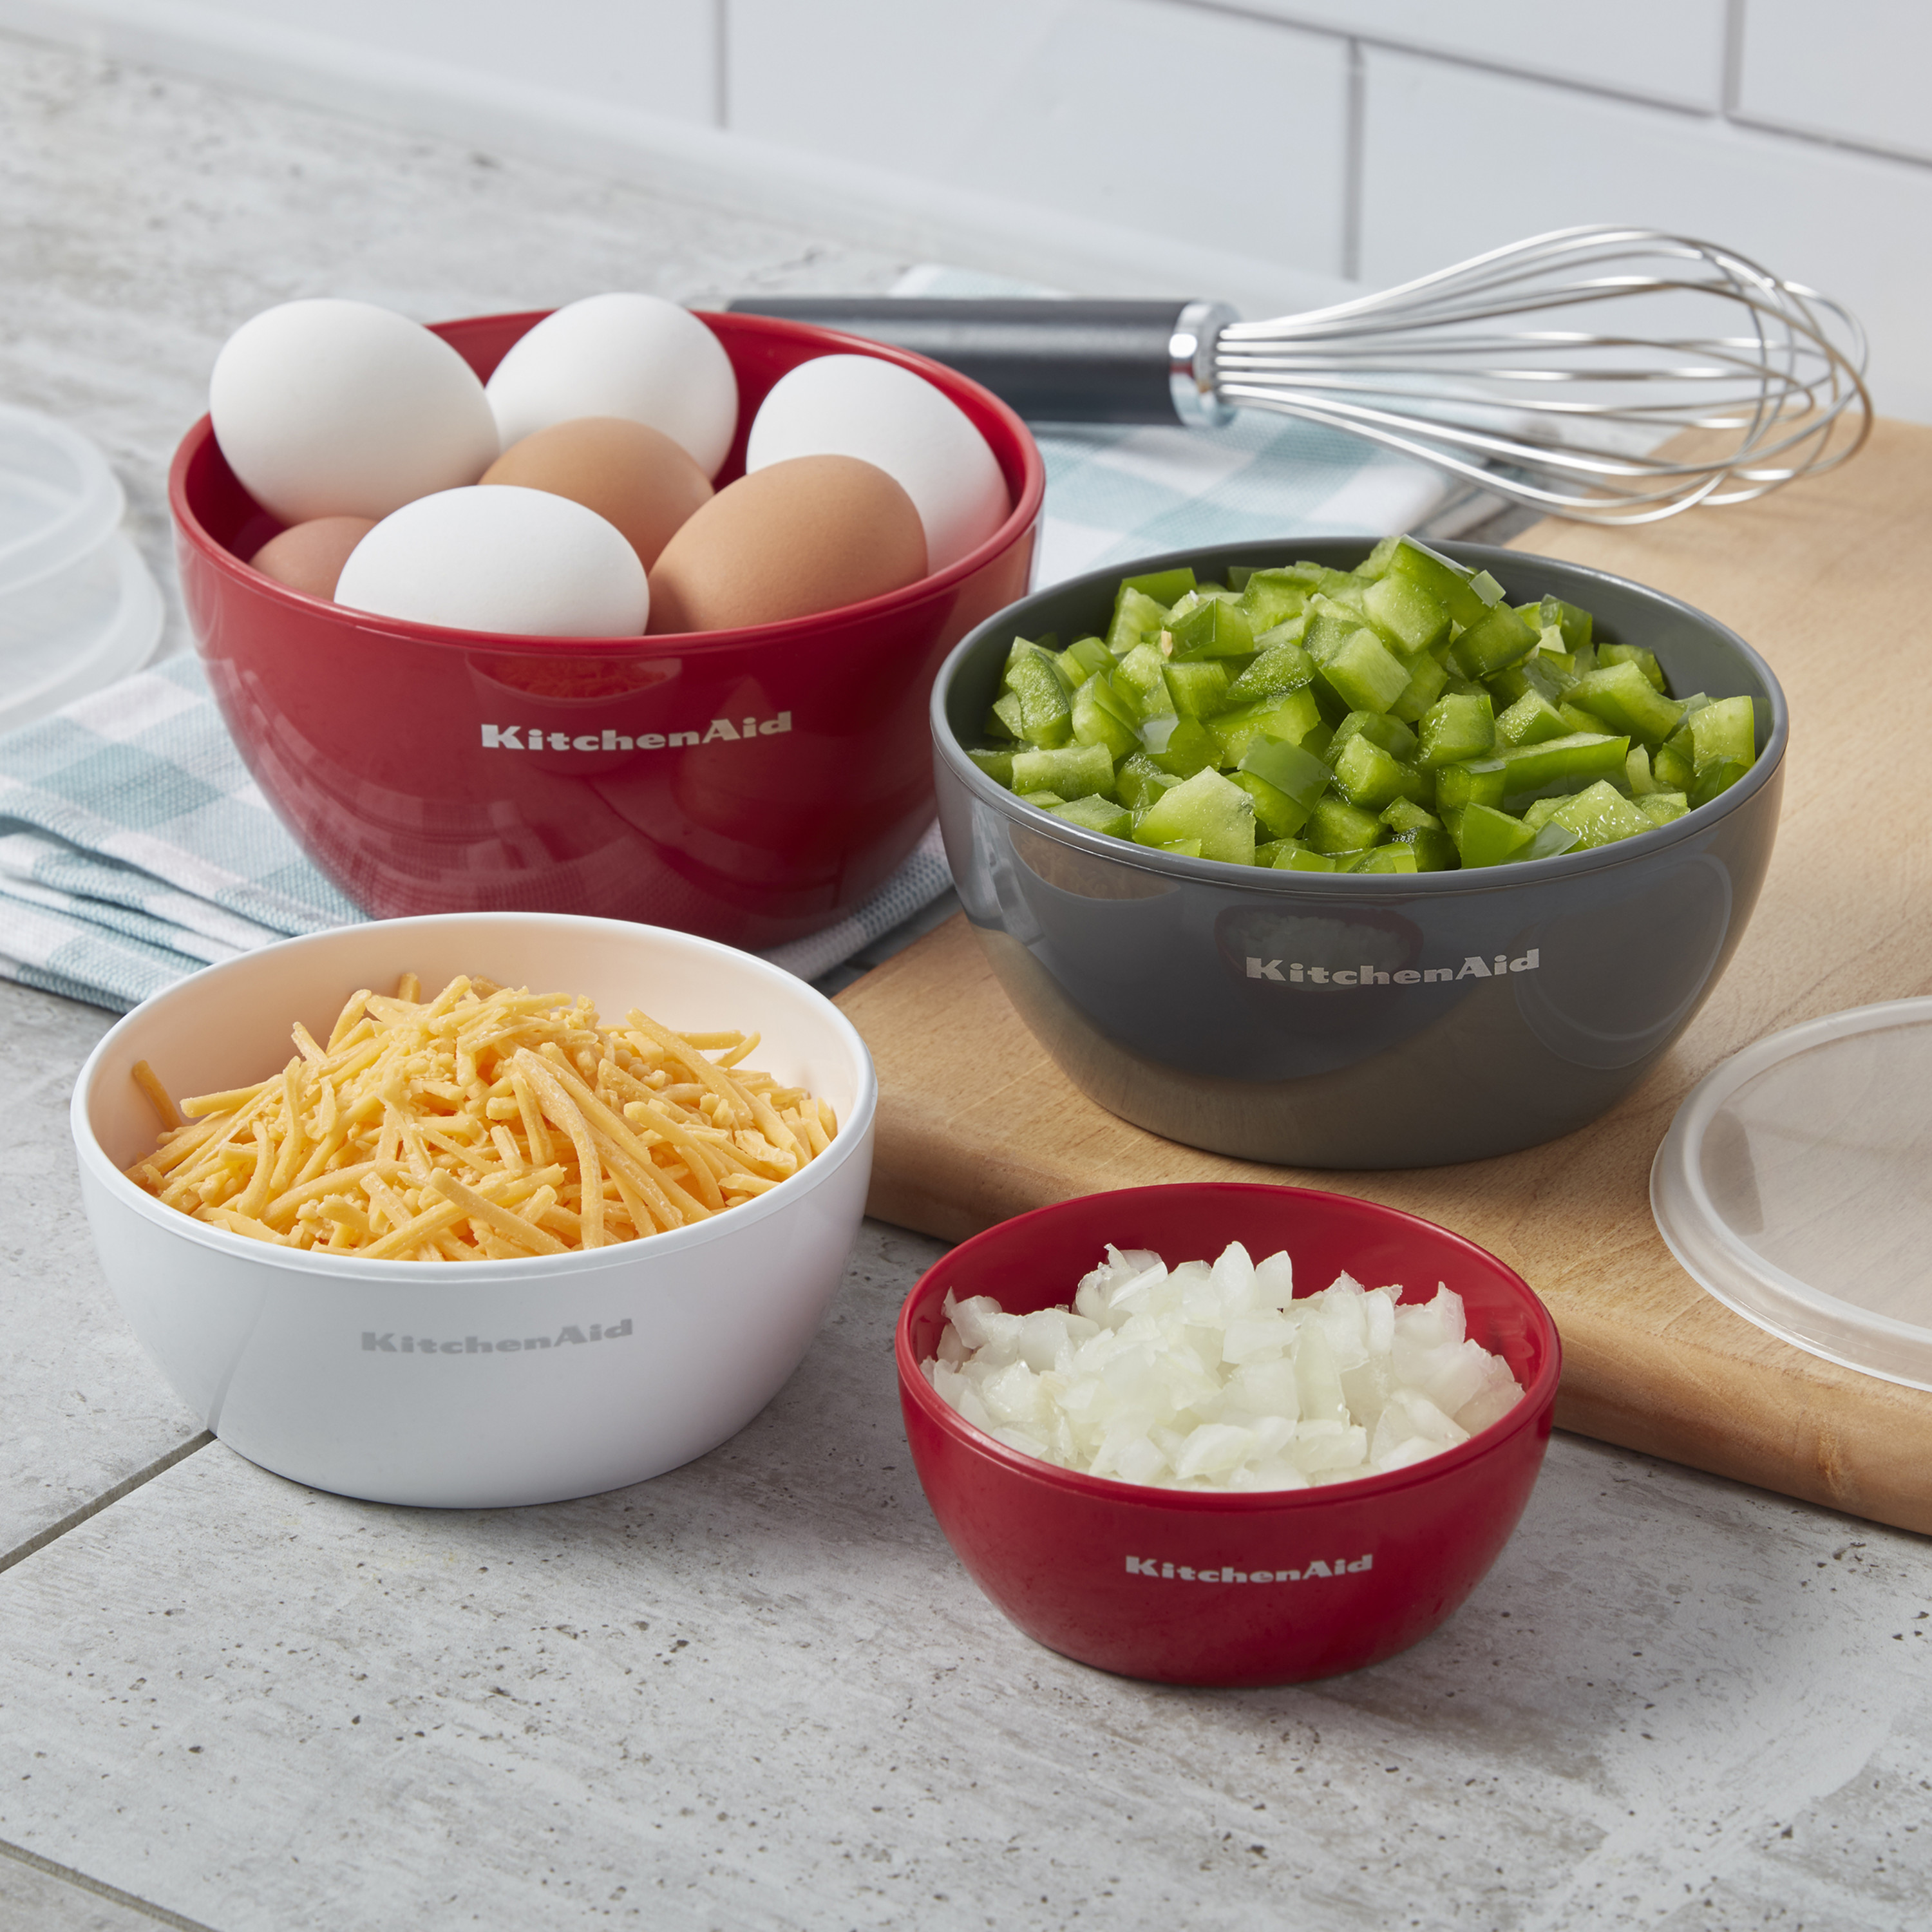 Kitchenaid 4-piece Prep Bowl Set with Lids, Assorted Sizes and Colors: Red, Grey, White - image 1 of 15